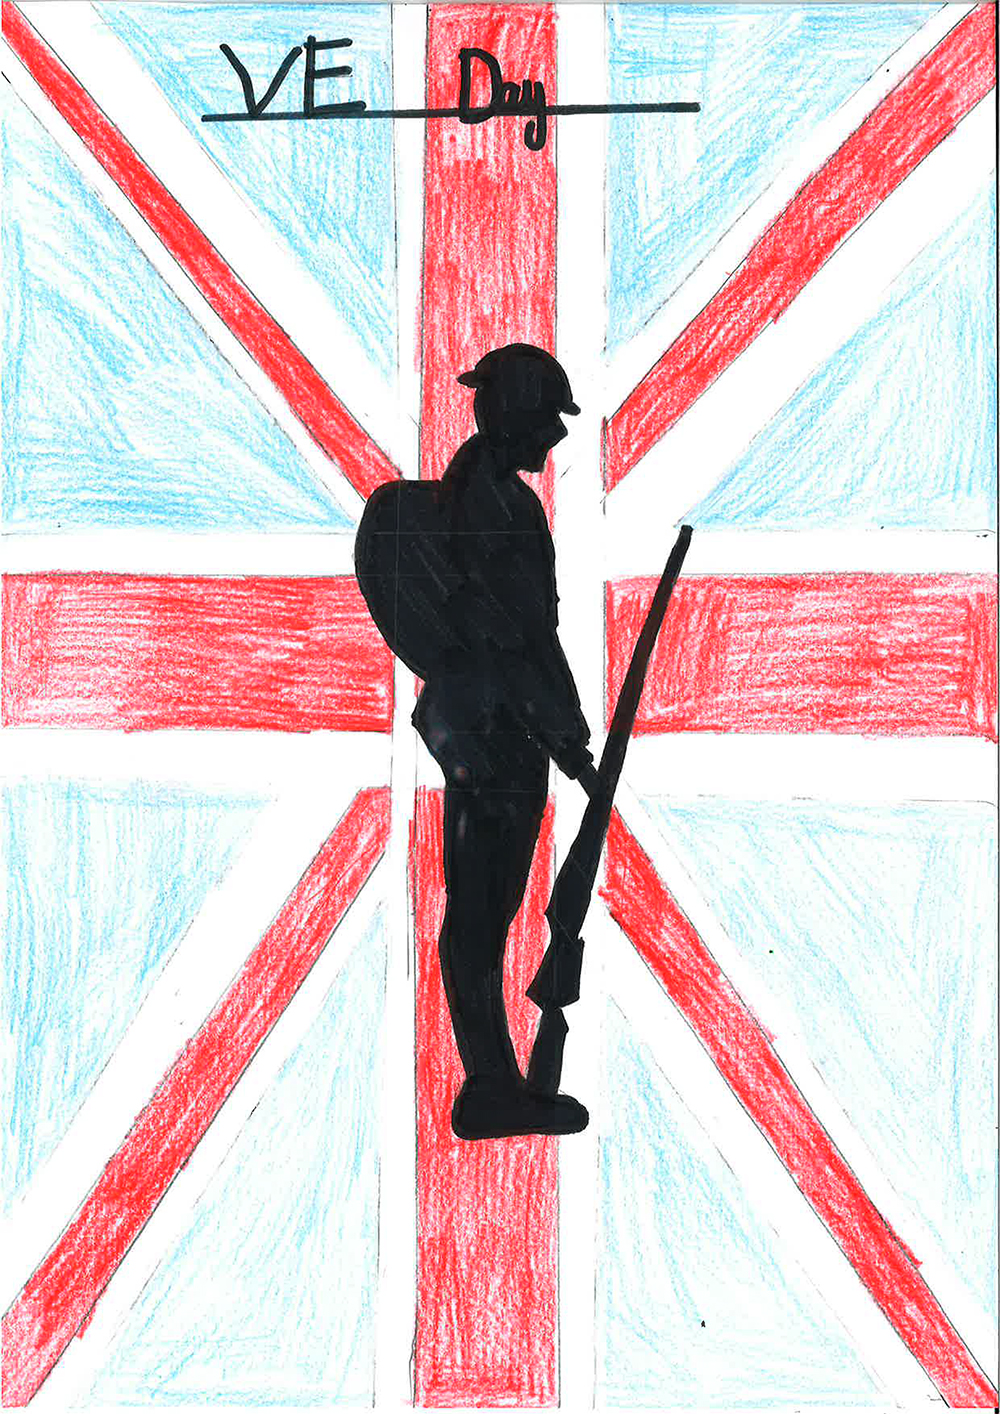 St Benedict's winning VE Day competition entry